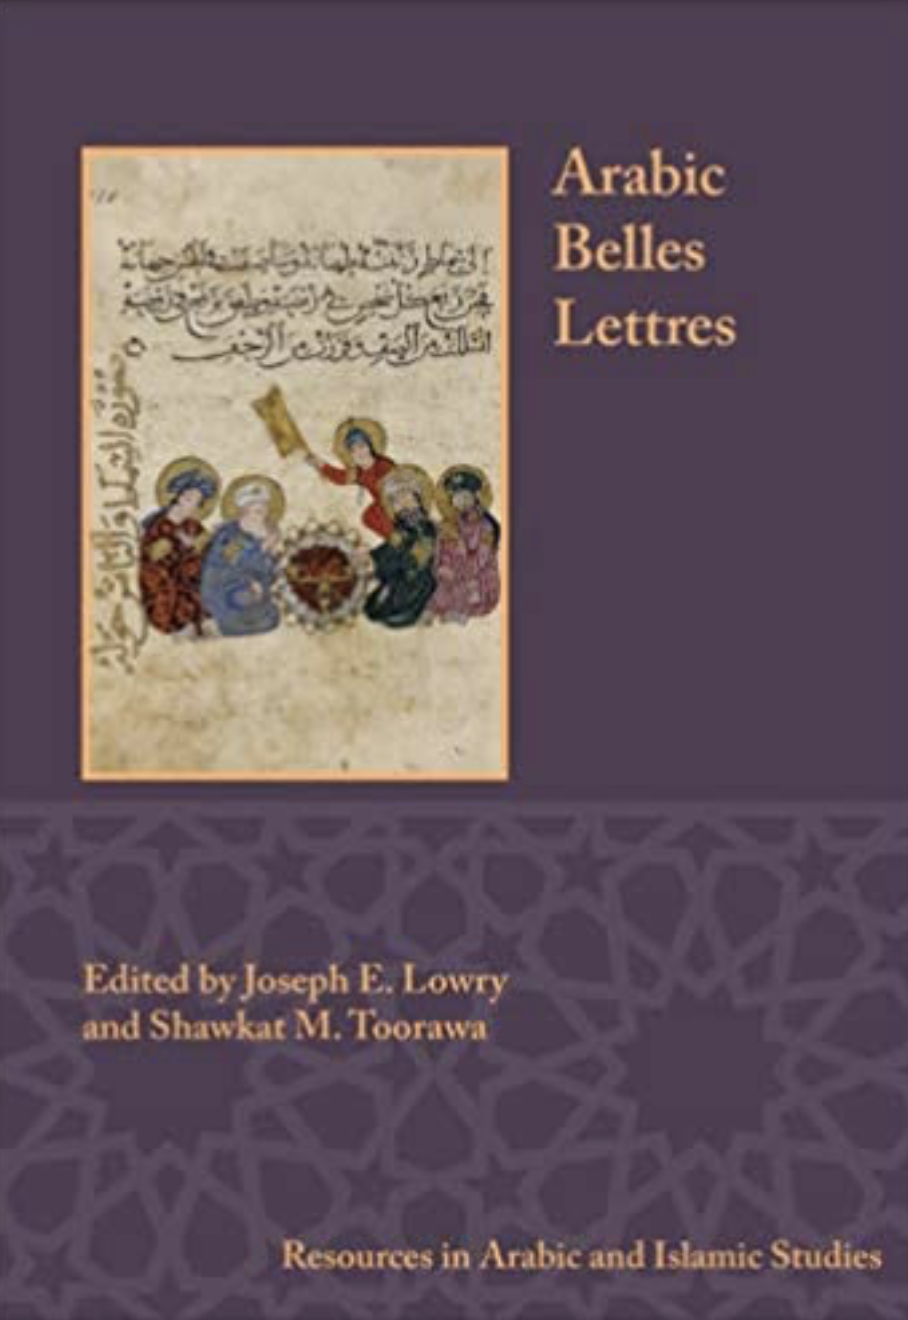 Photo Of Book Cover For The Book Entitled Arabic Belles Lettres